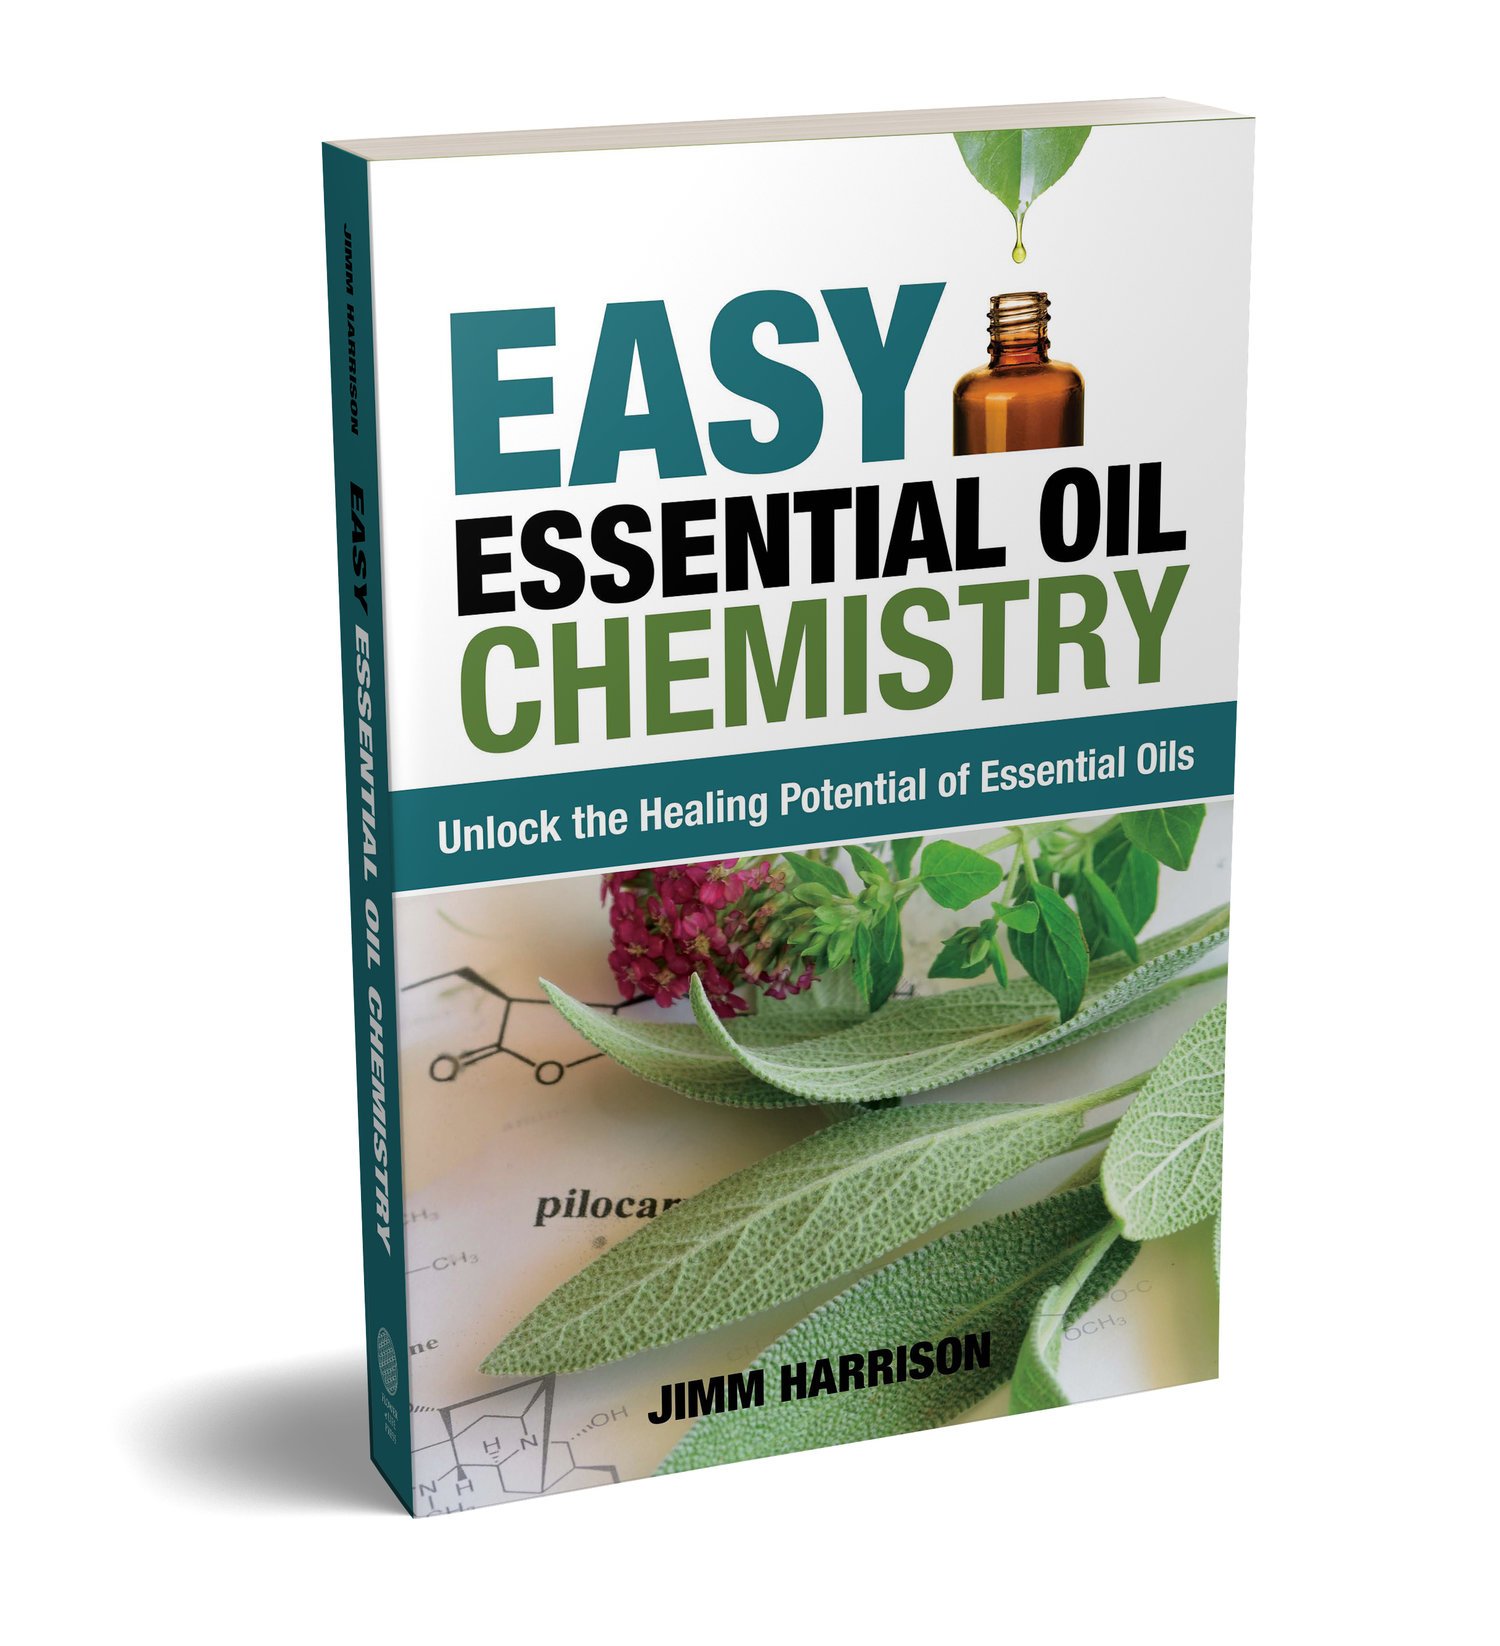 Easy Essential Oil Chemistry: Unlock the Healing Potential of